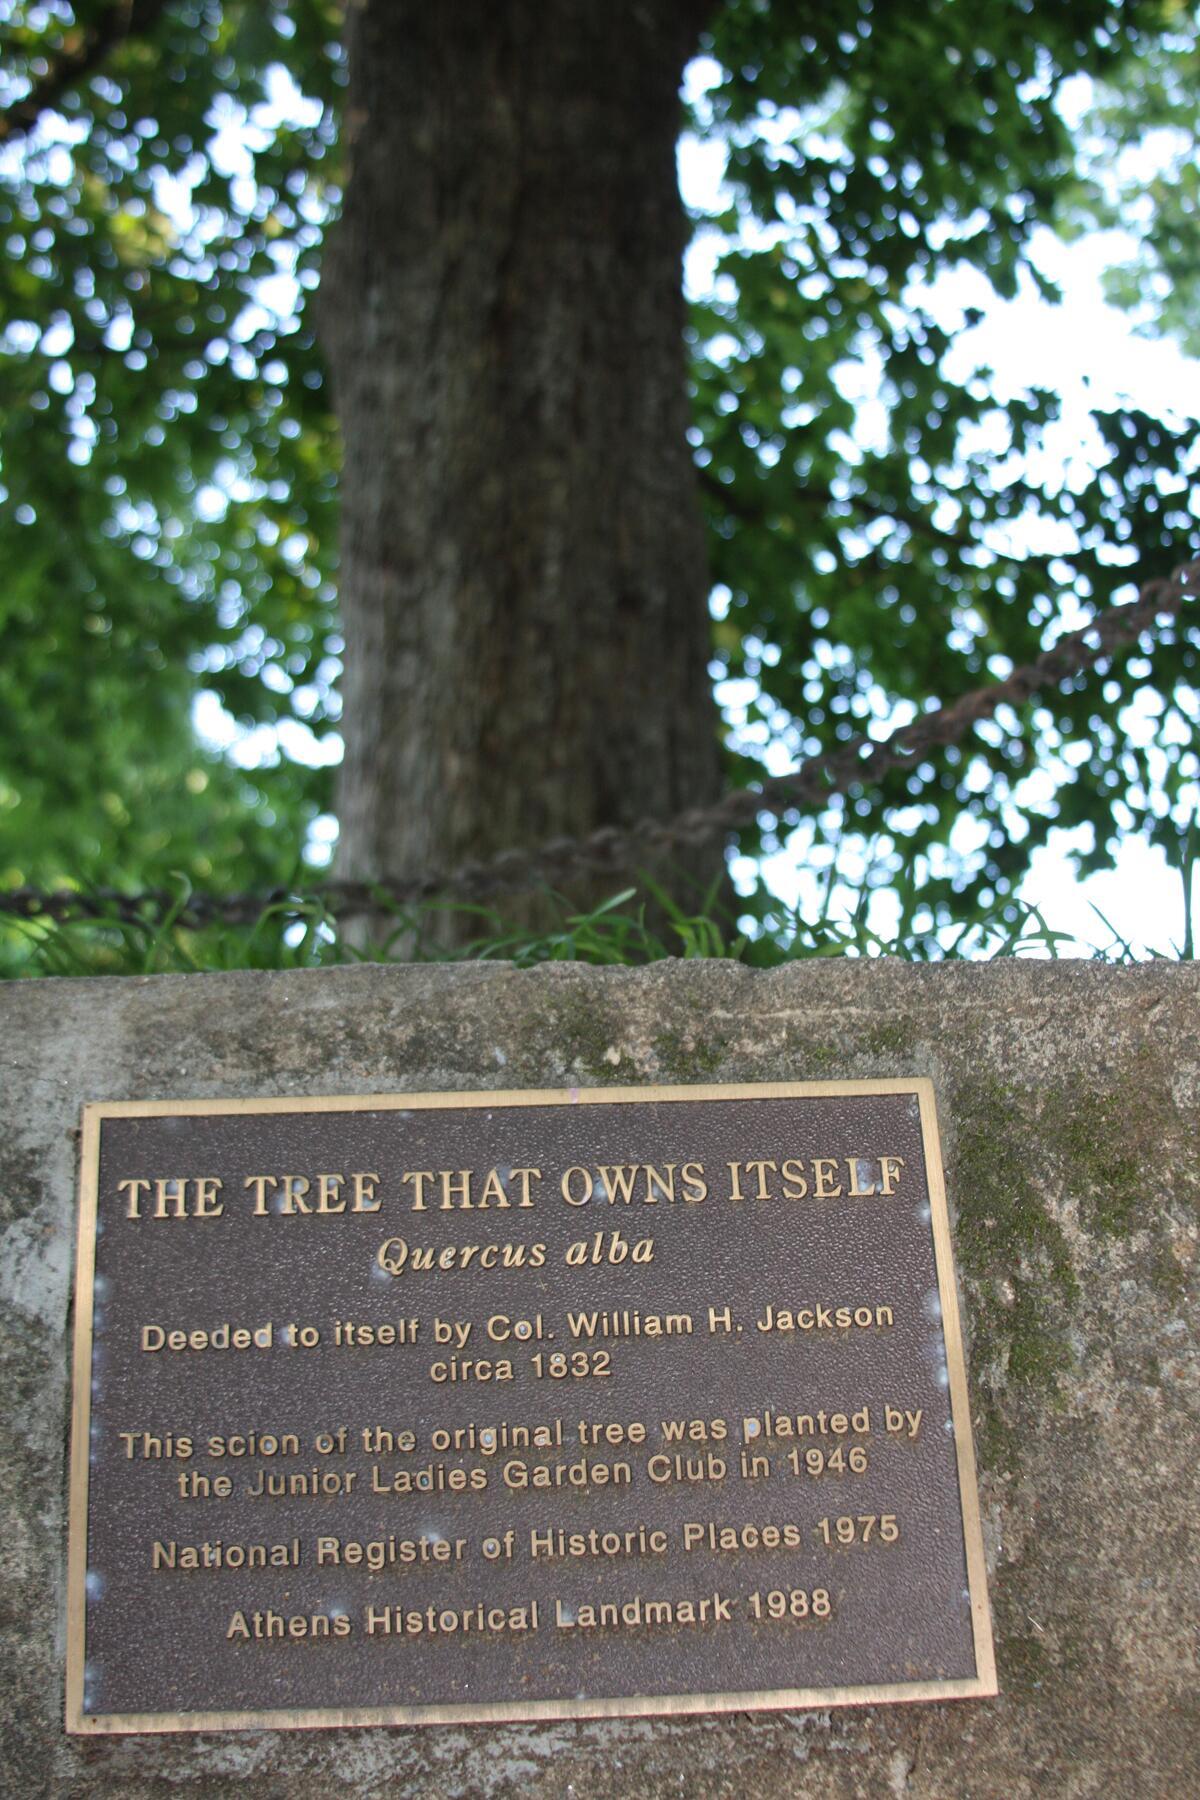 The Tree That Owns Itself